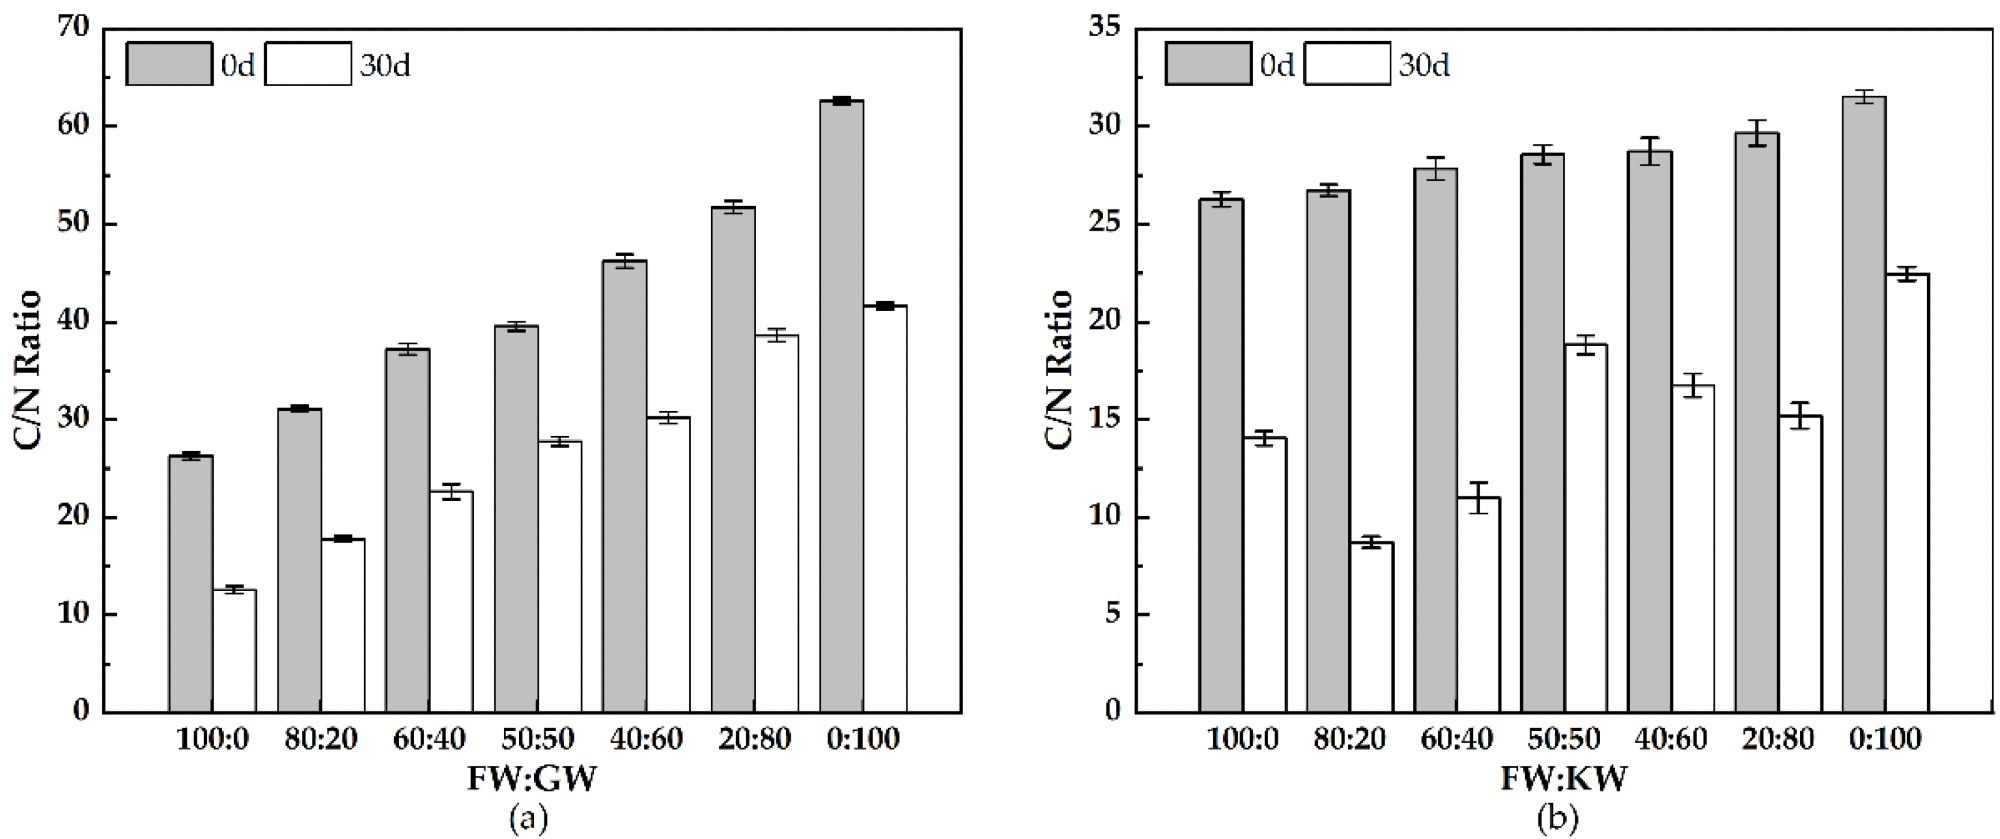 C/N ratios for the thermophilic dry anaerobic co-fermentation of (a) FW + GW and (b) FW + KW.